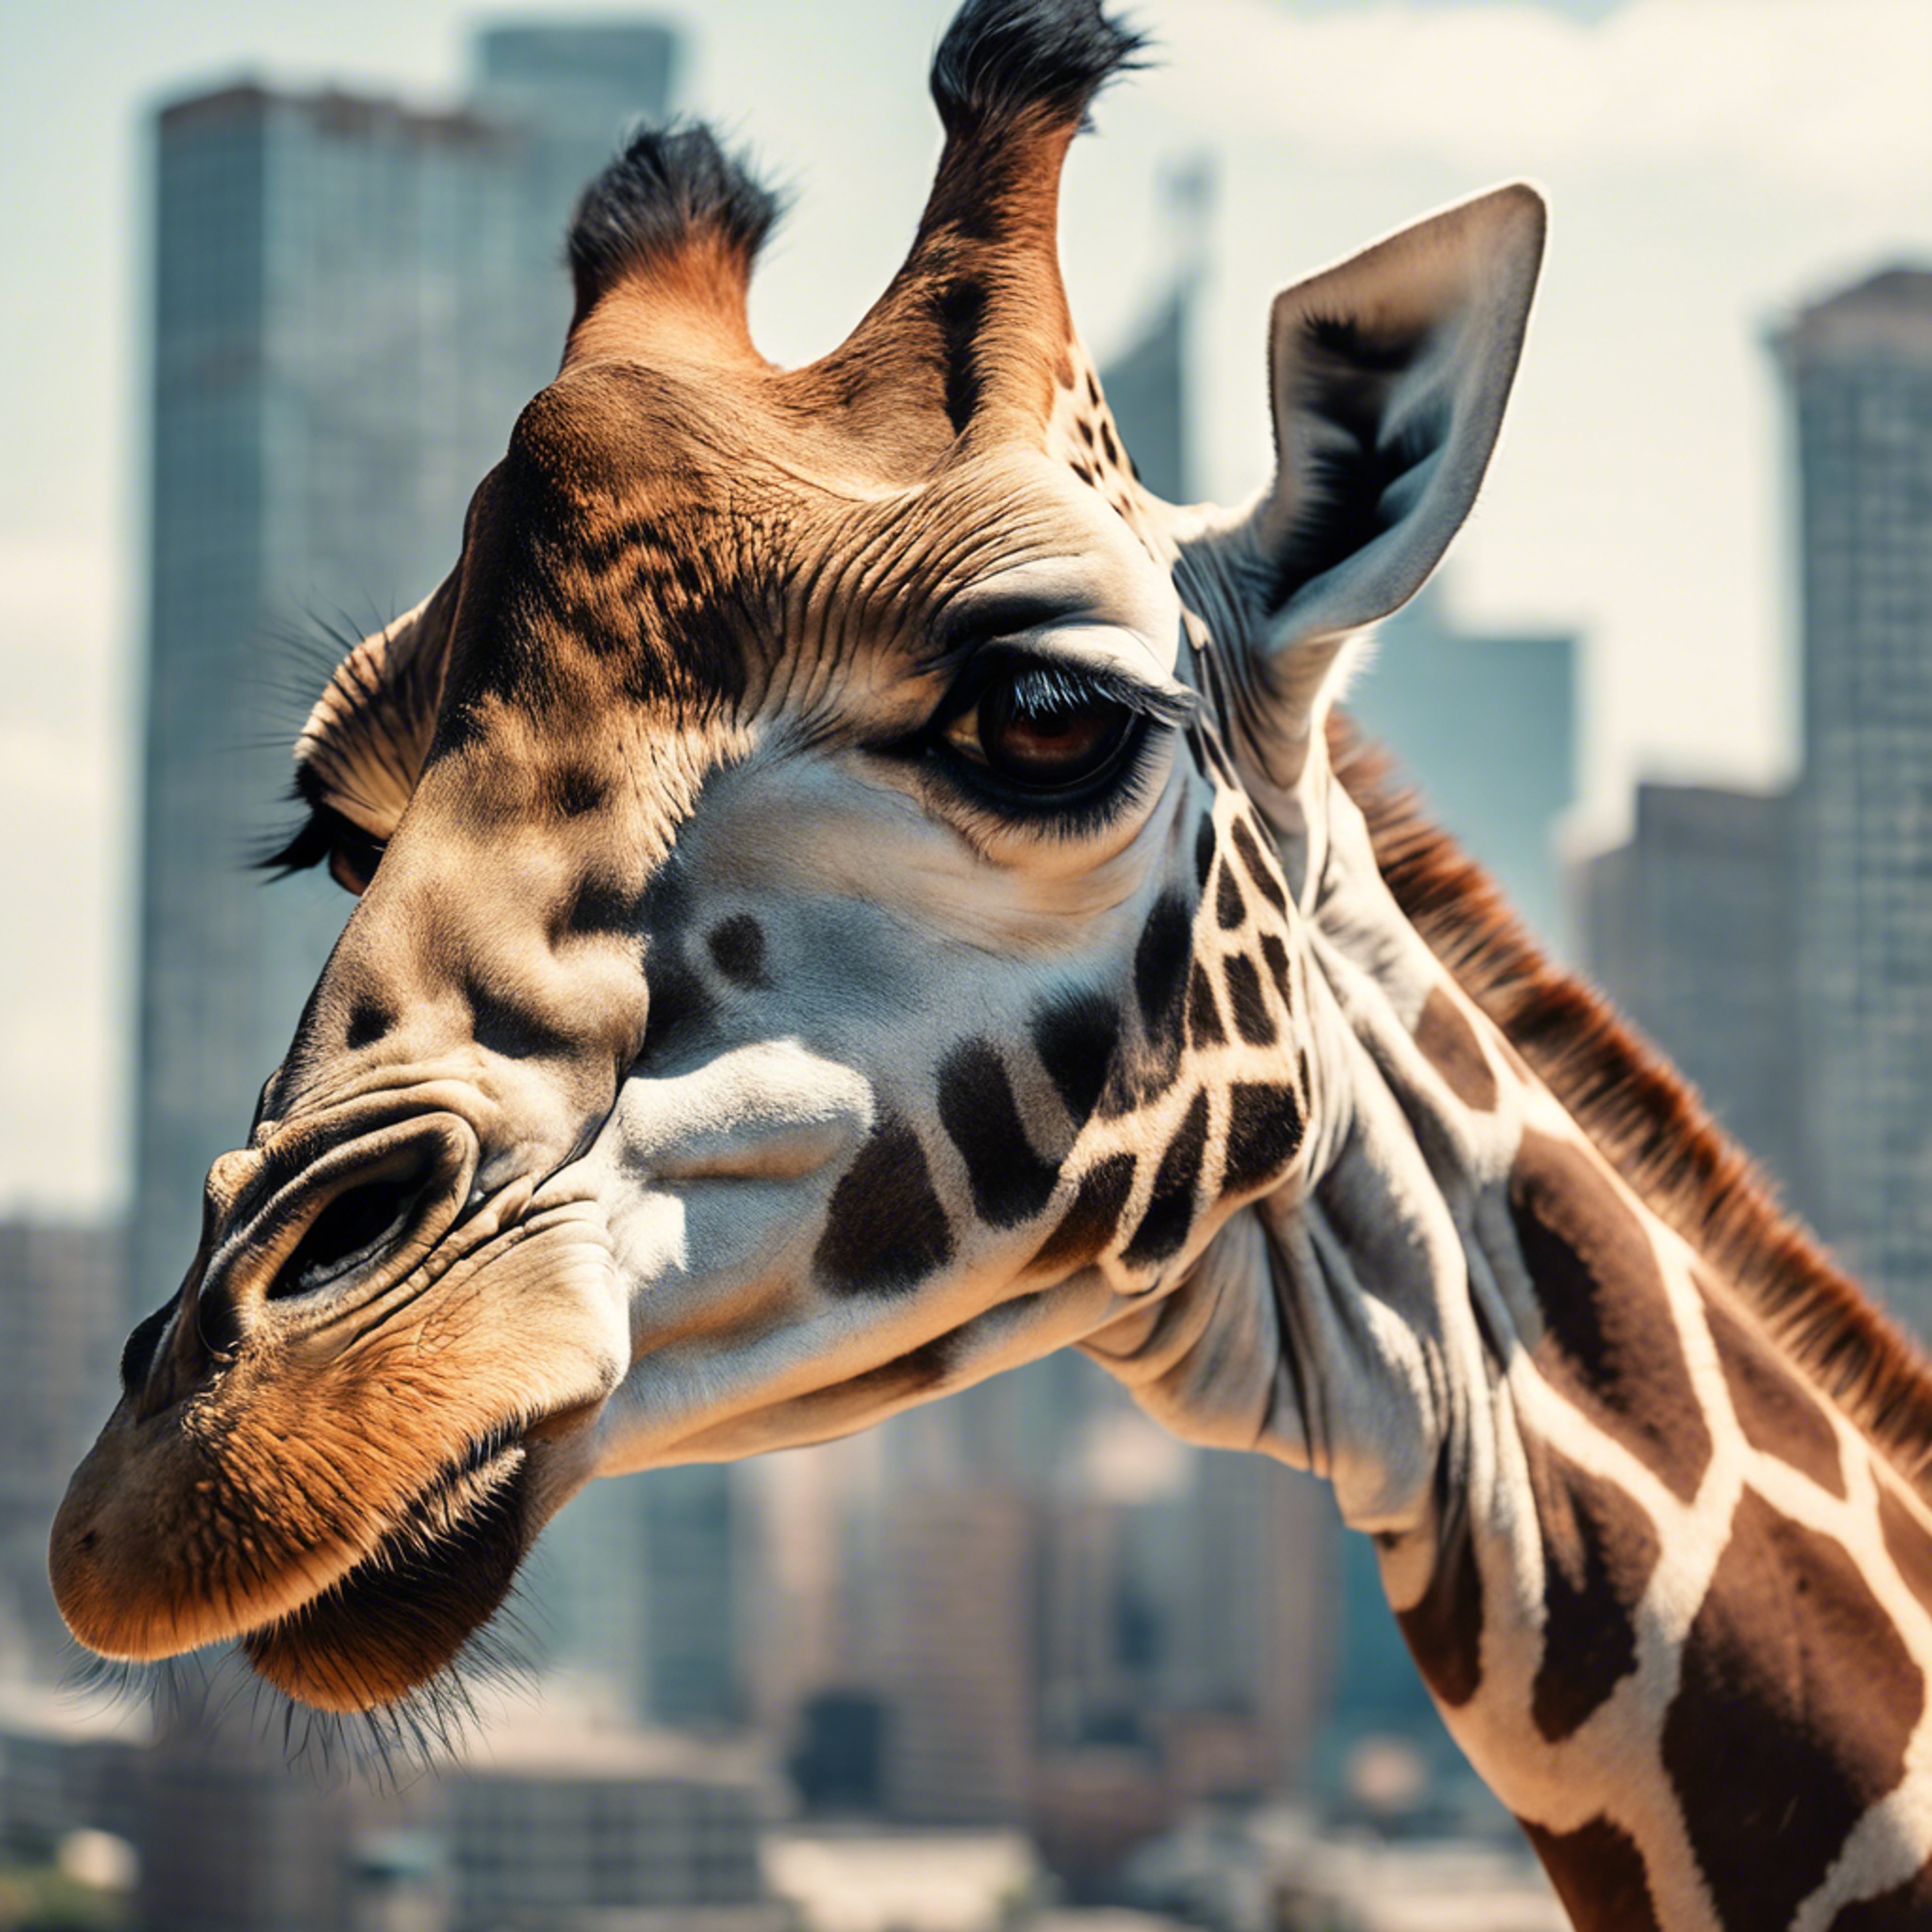 Illustration of a giraffe with a cityscape reflected in its eye. Tapet[07df3c2b5cb24fb9a513]